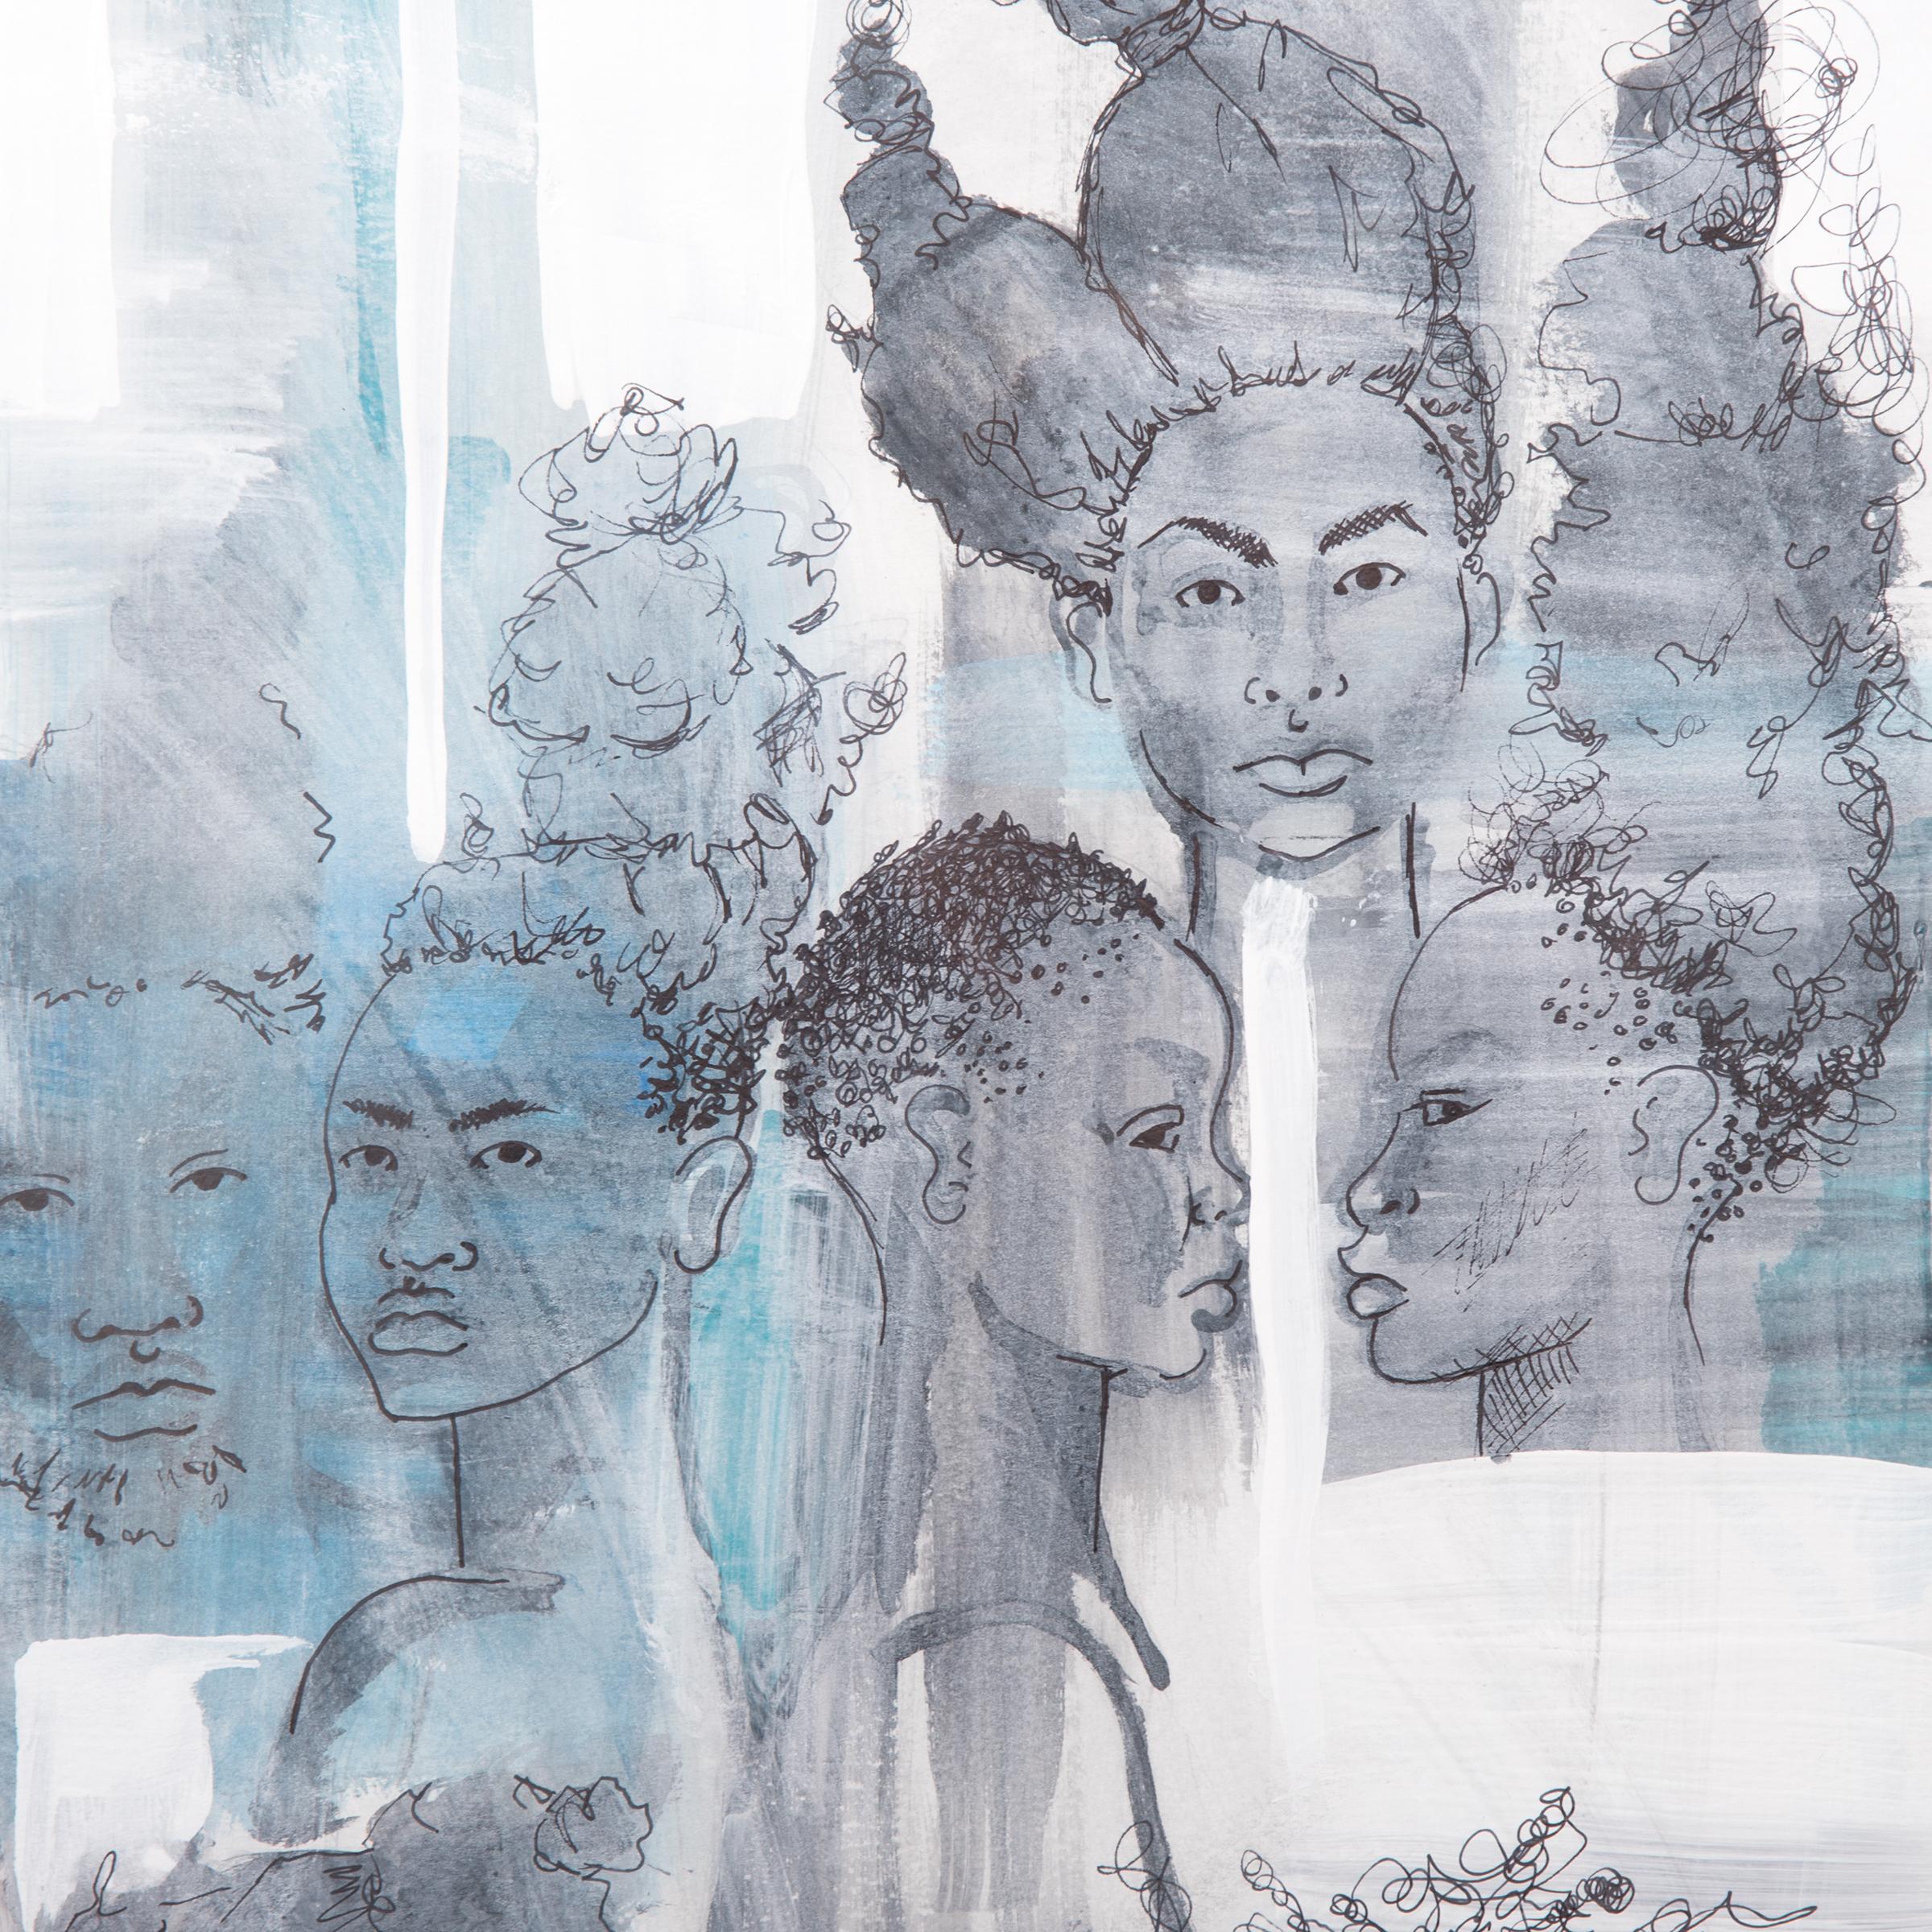 Tracy crump uses washes of grey, white and aqua to both conceal and reveal sensitively drawn figures. Each figure stands alone as an individual, possessing unique features and hairstyles, yet, as the title of the series suggests, the men and women